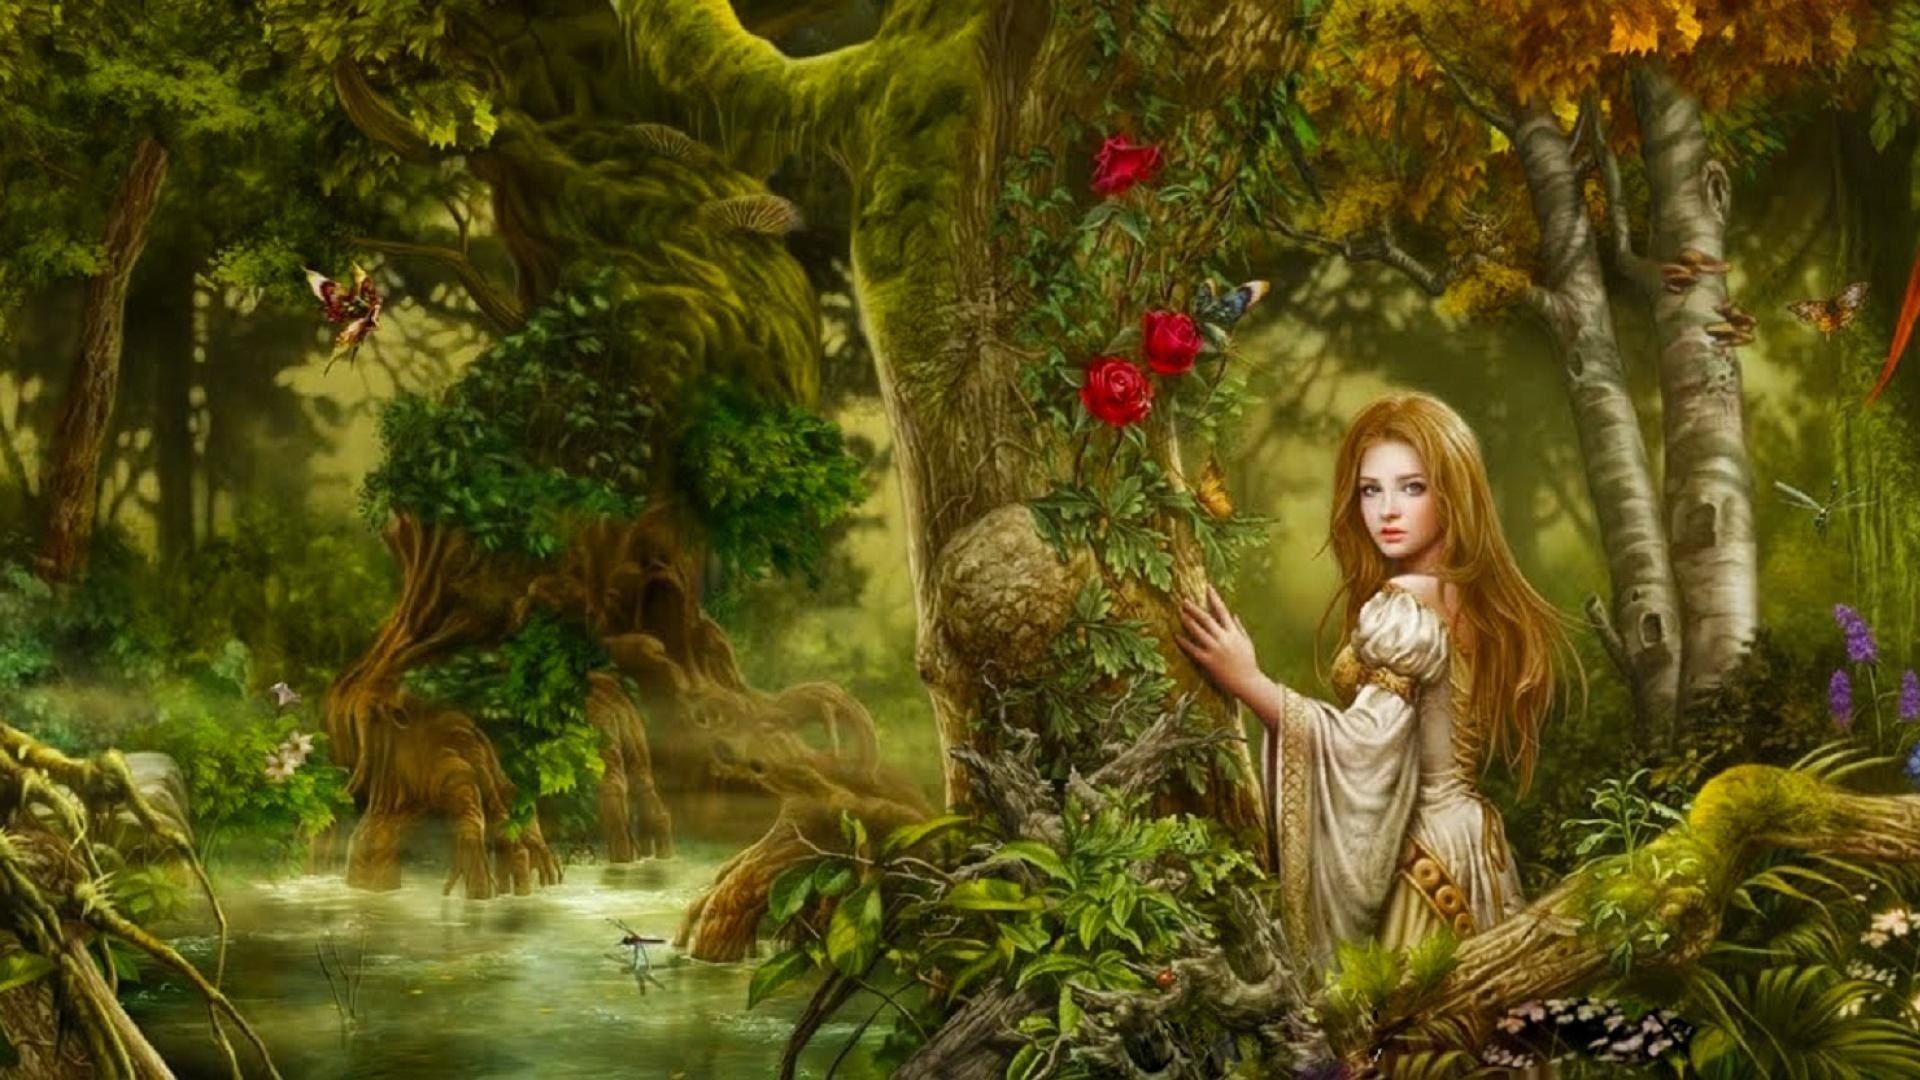 Princess in Magical Forest HD Wallpaper. Background Image